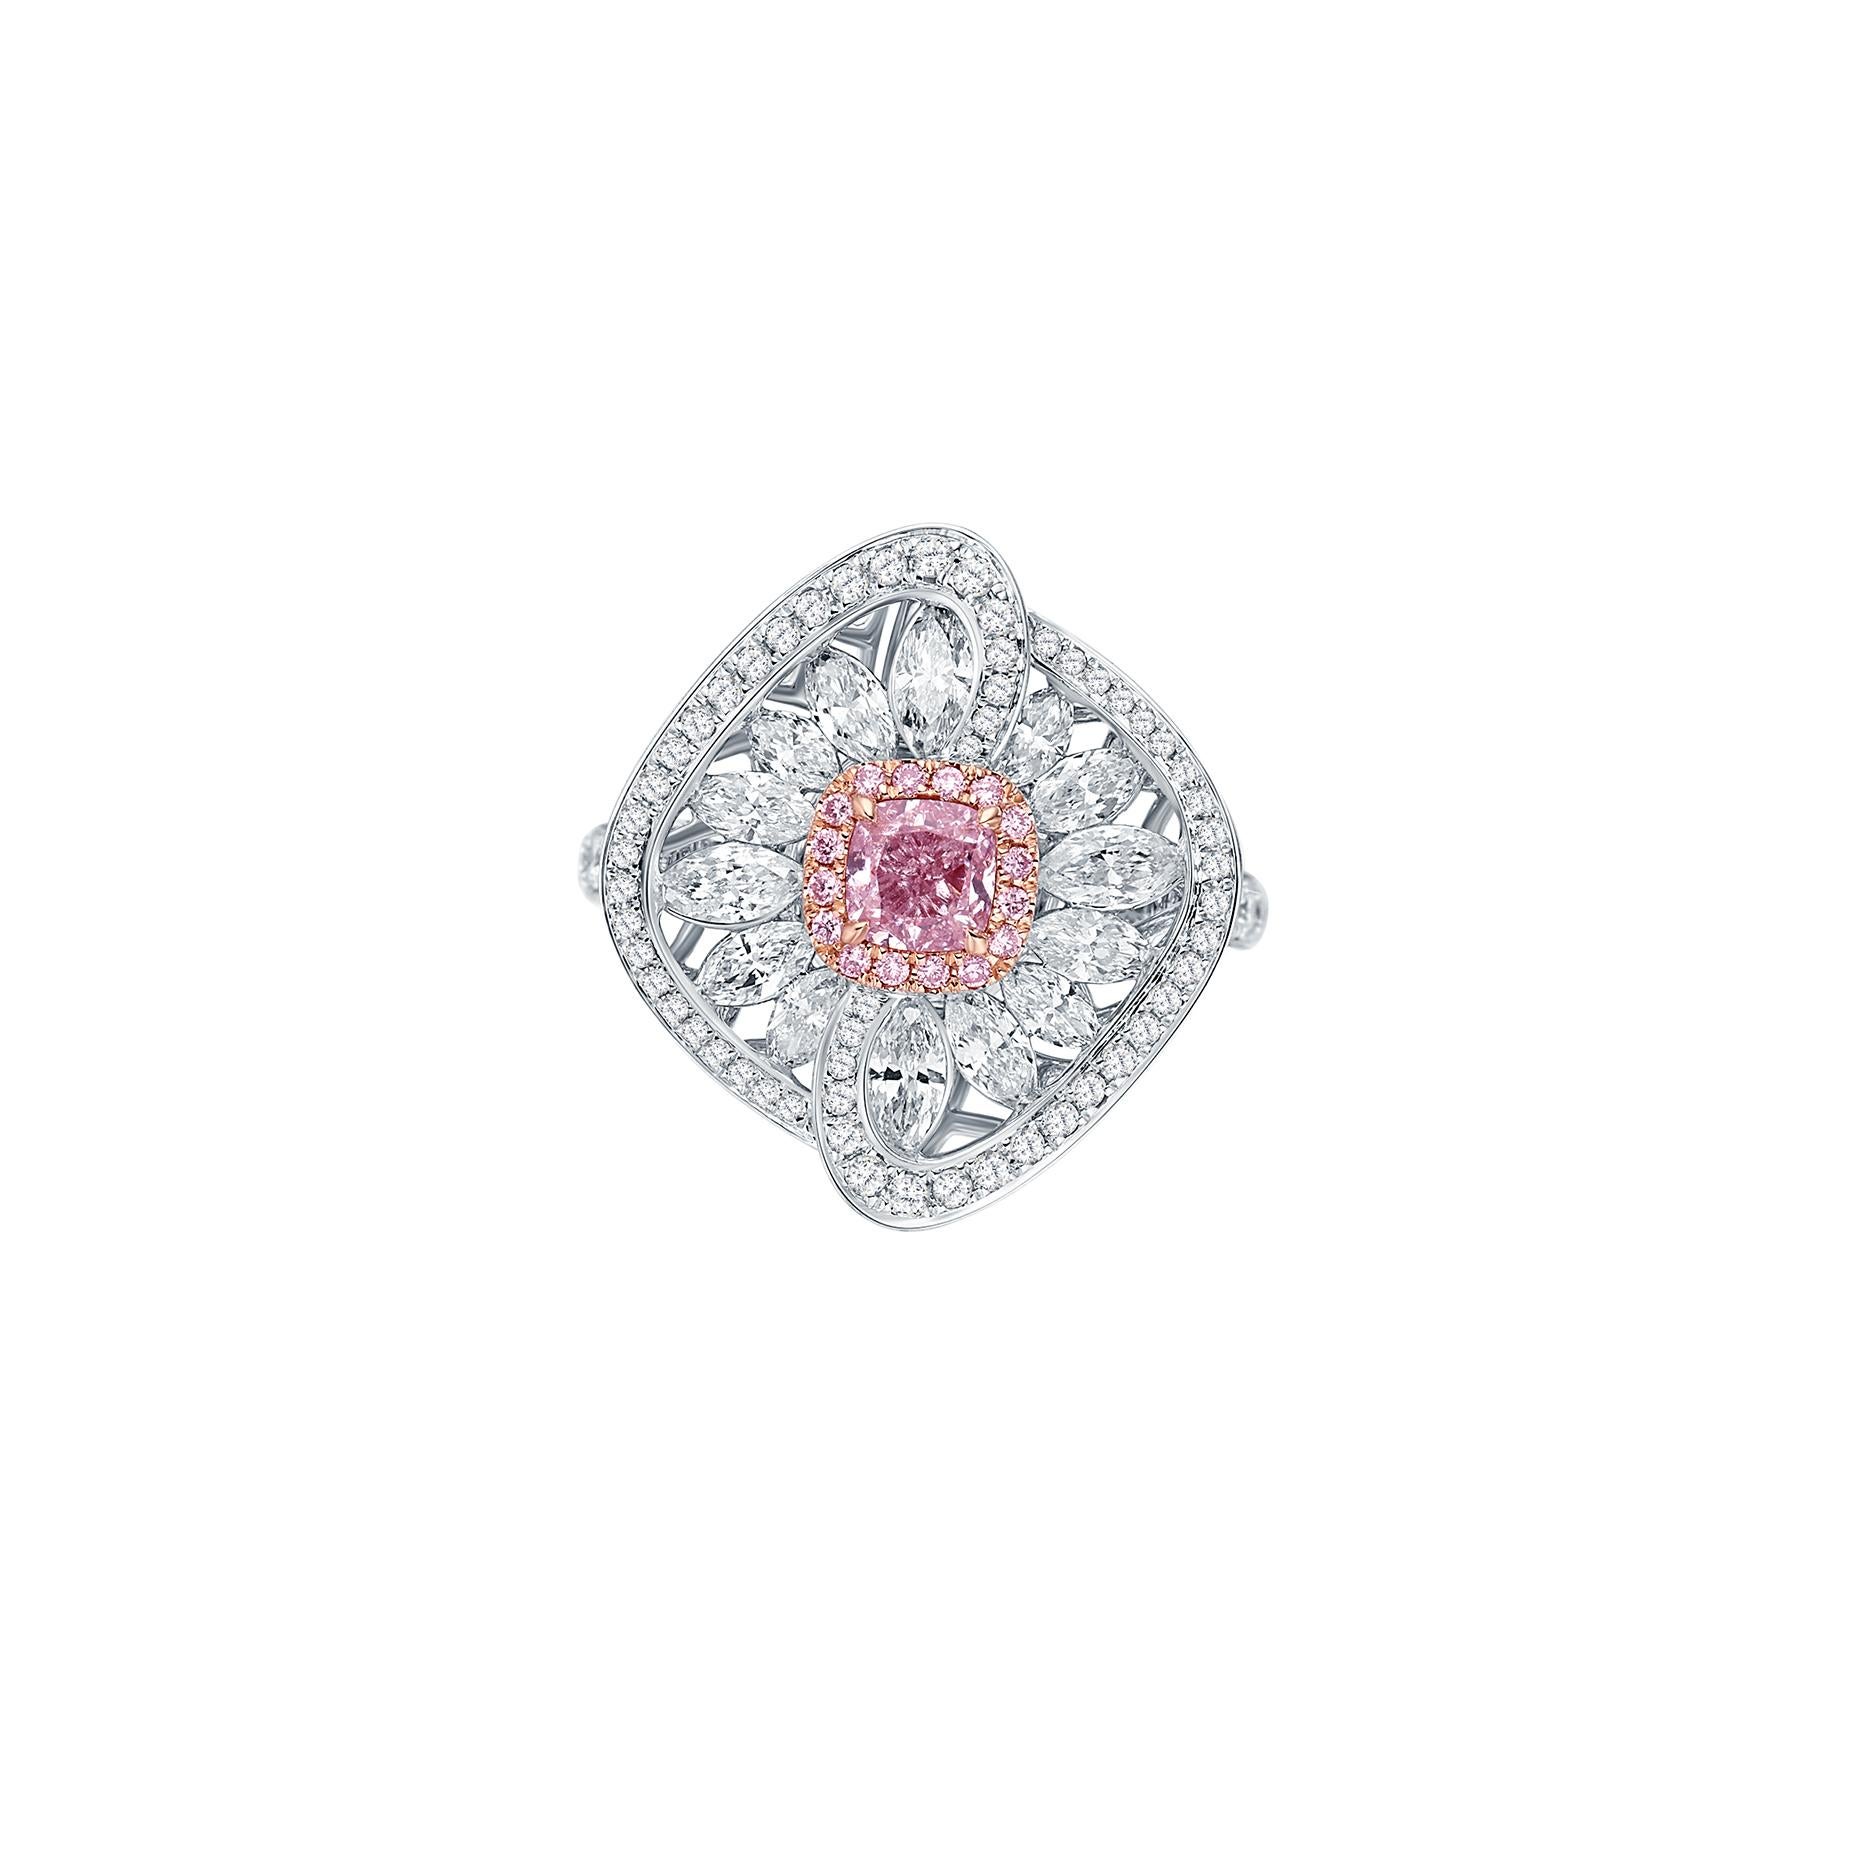 The characteristics for the described diamond jewelry with GIA Certification Number 5383968204:

Style: KK-5813

Colour Grade: Light Pink
Center Stone: 0.51ct LIGHT PINK

Carat Weight: 0.50 carats (1 piece)

Marquise White Diamonds:
Carat Weight: